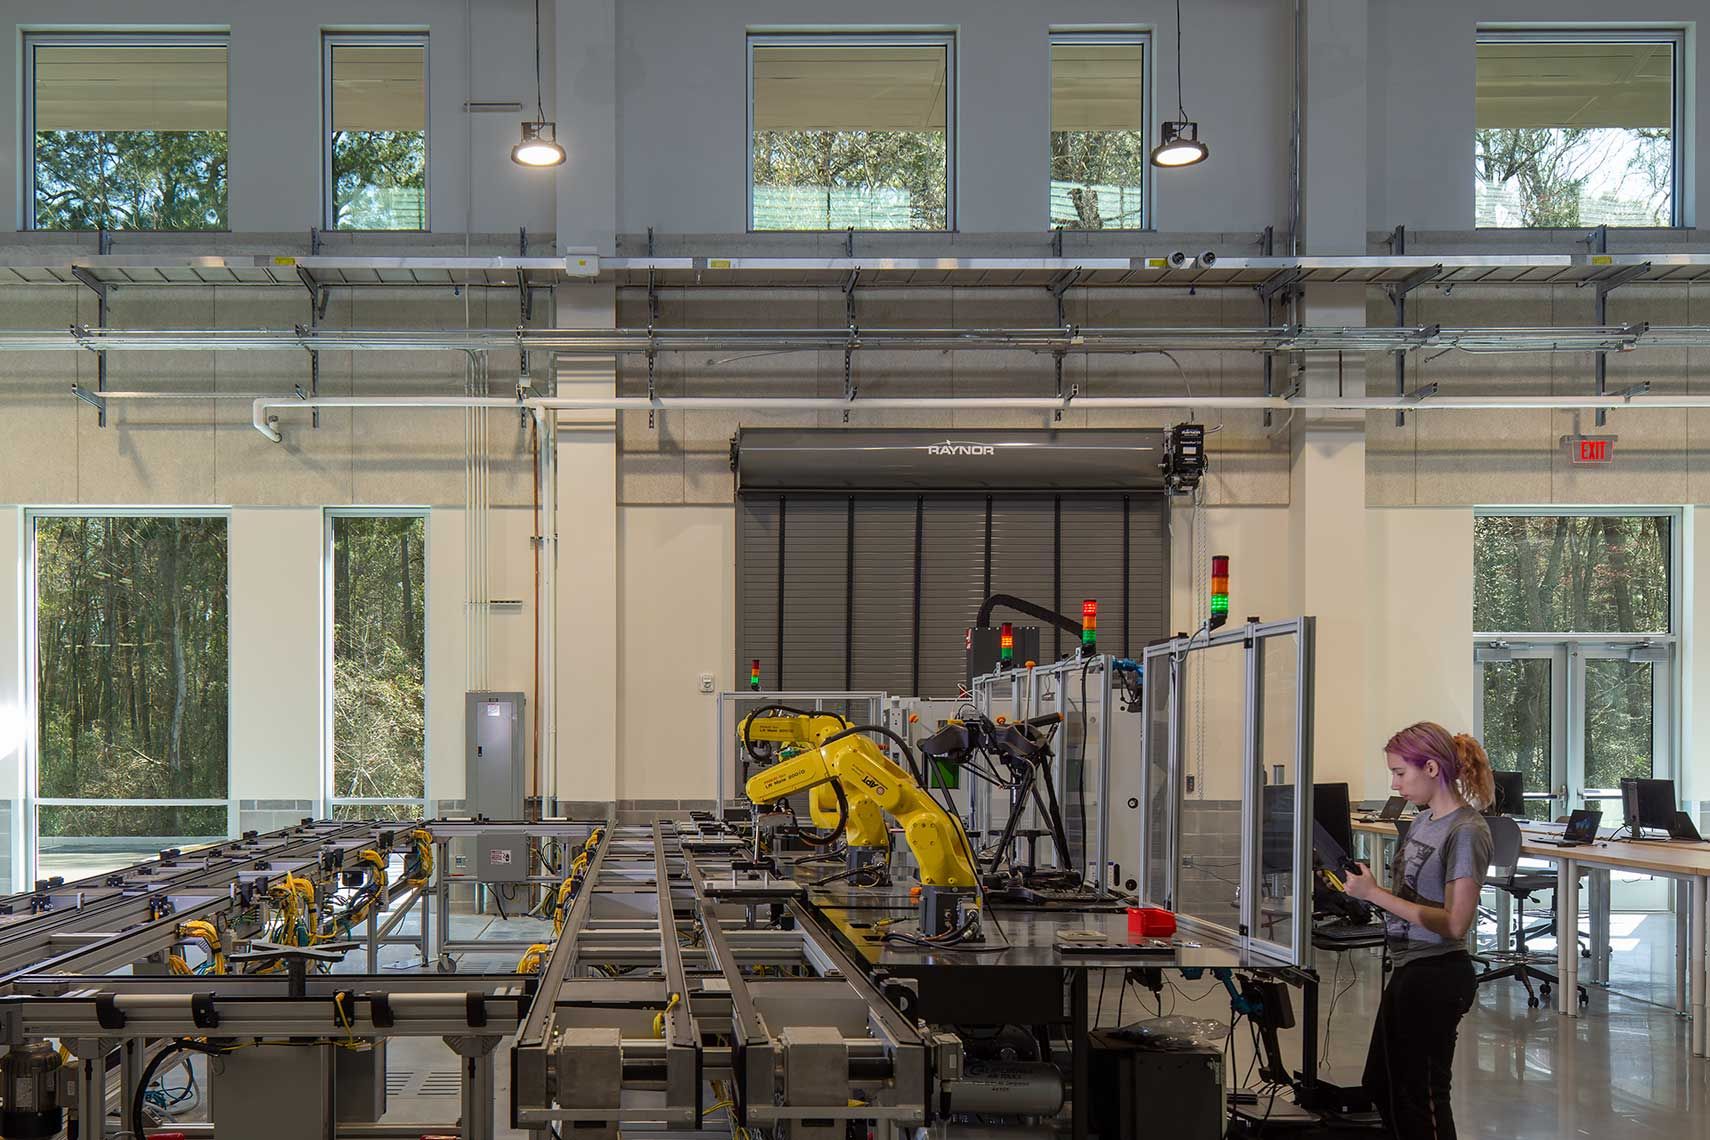 A view of a single student operating the robotic assembly machines at GA Southern